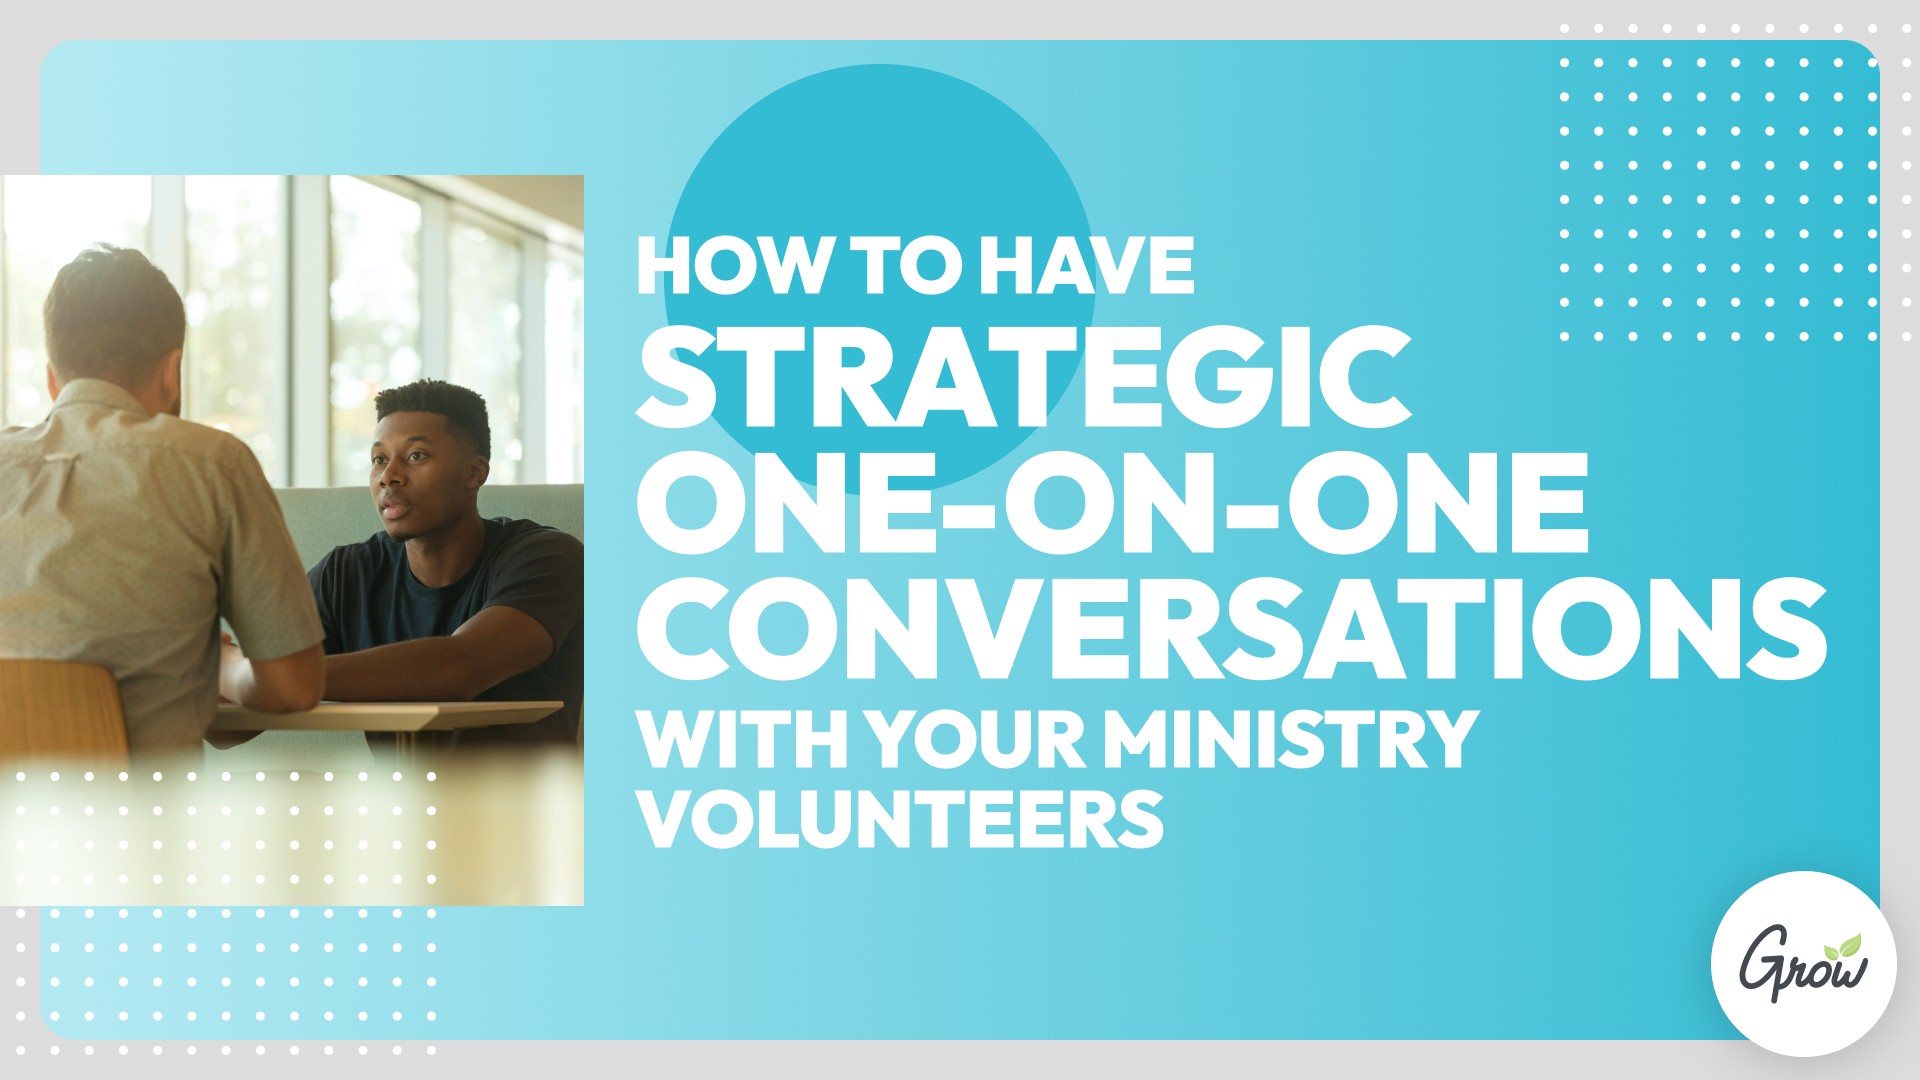 How to Have Strategic One-on-One Conversations with Your Ministry Volunteers